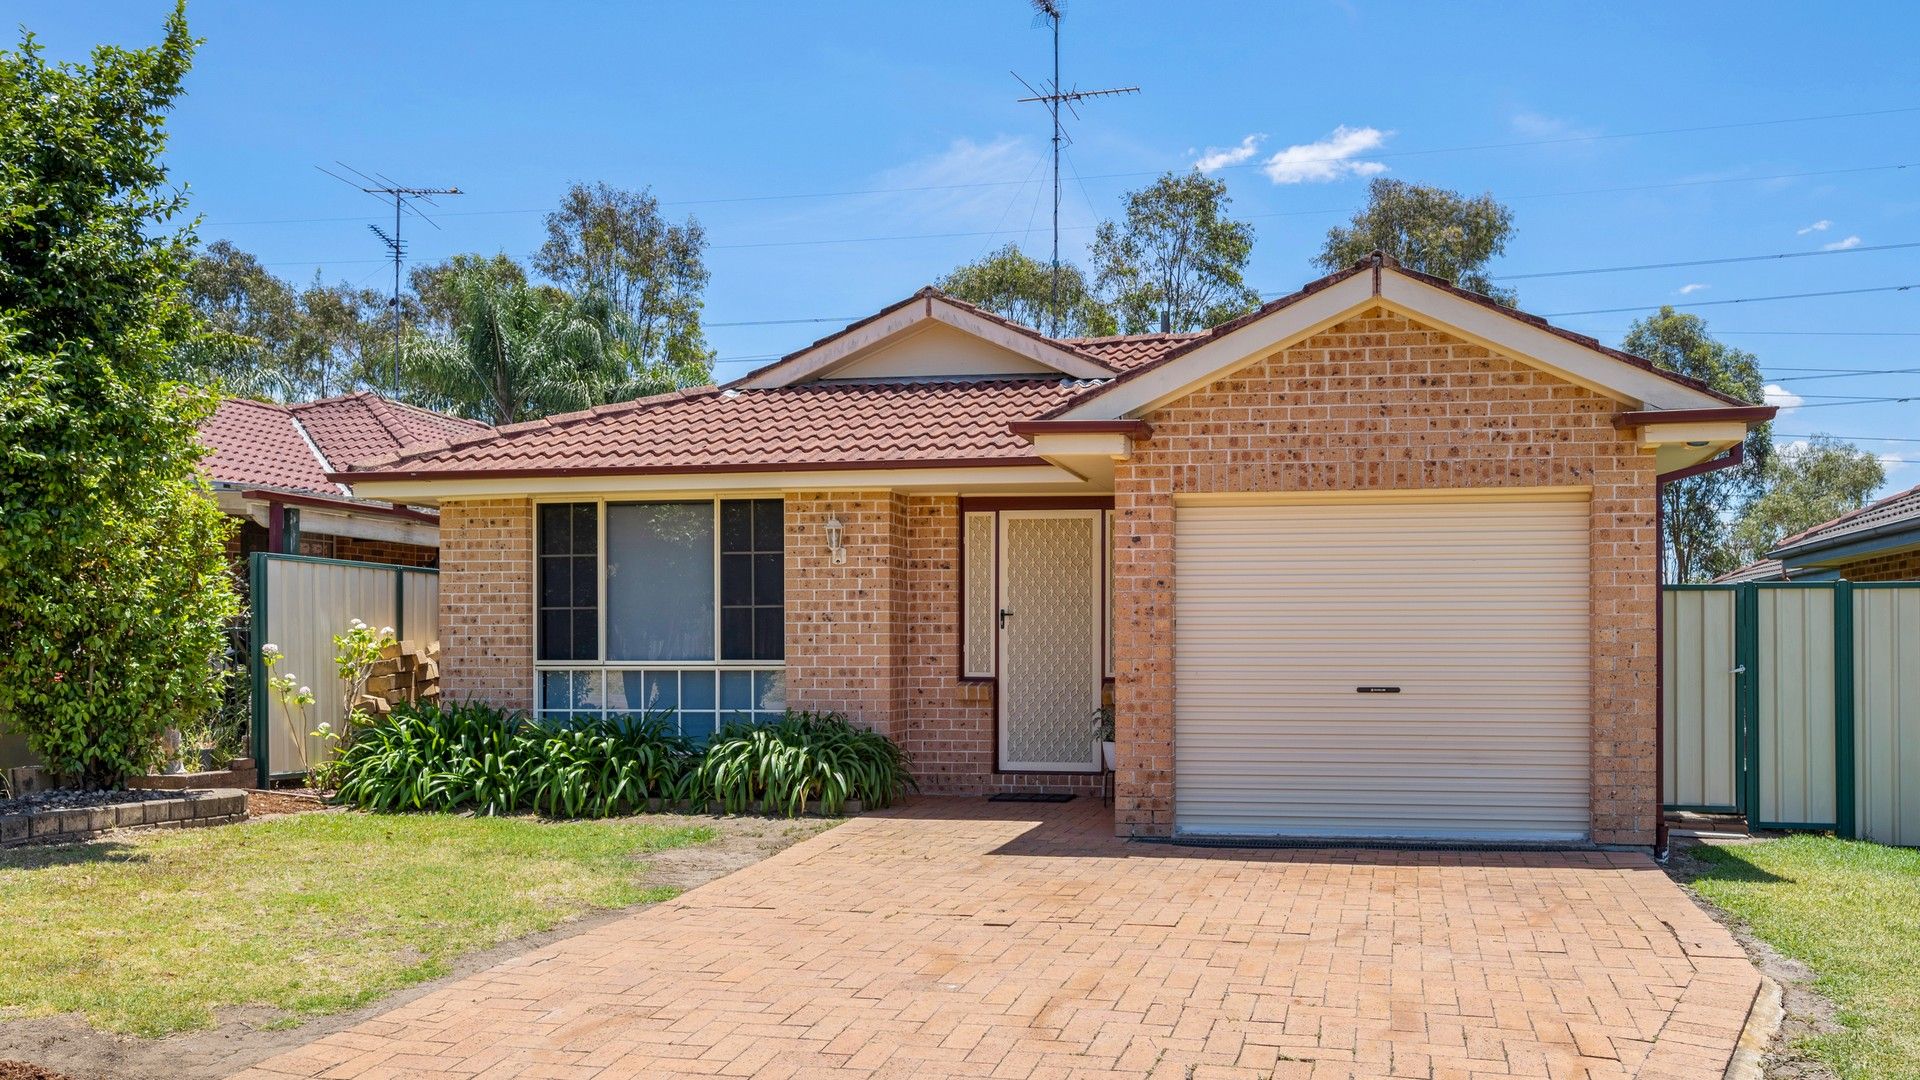 3 bedrooms House in 27 Pardalote Place GLENMORE PARK NSW, 2745